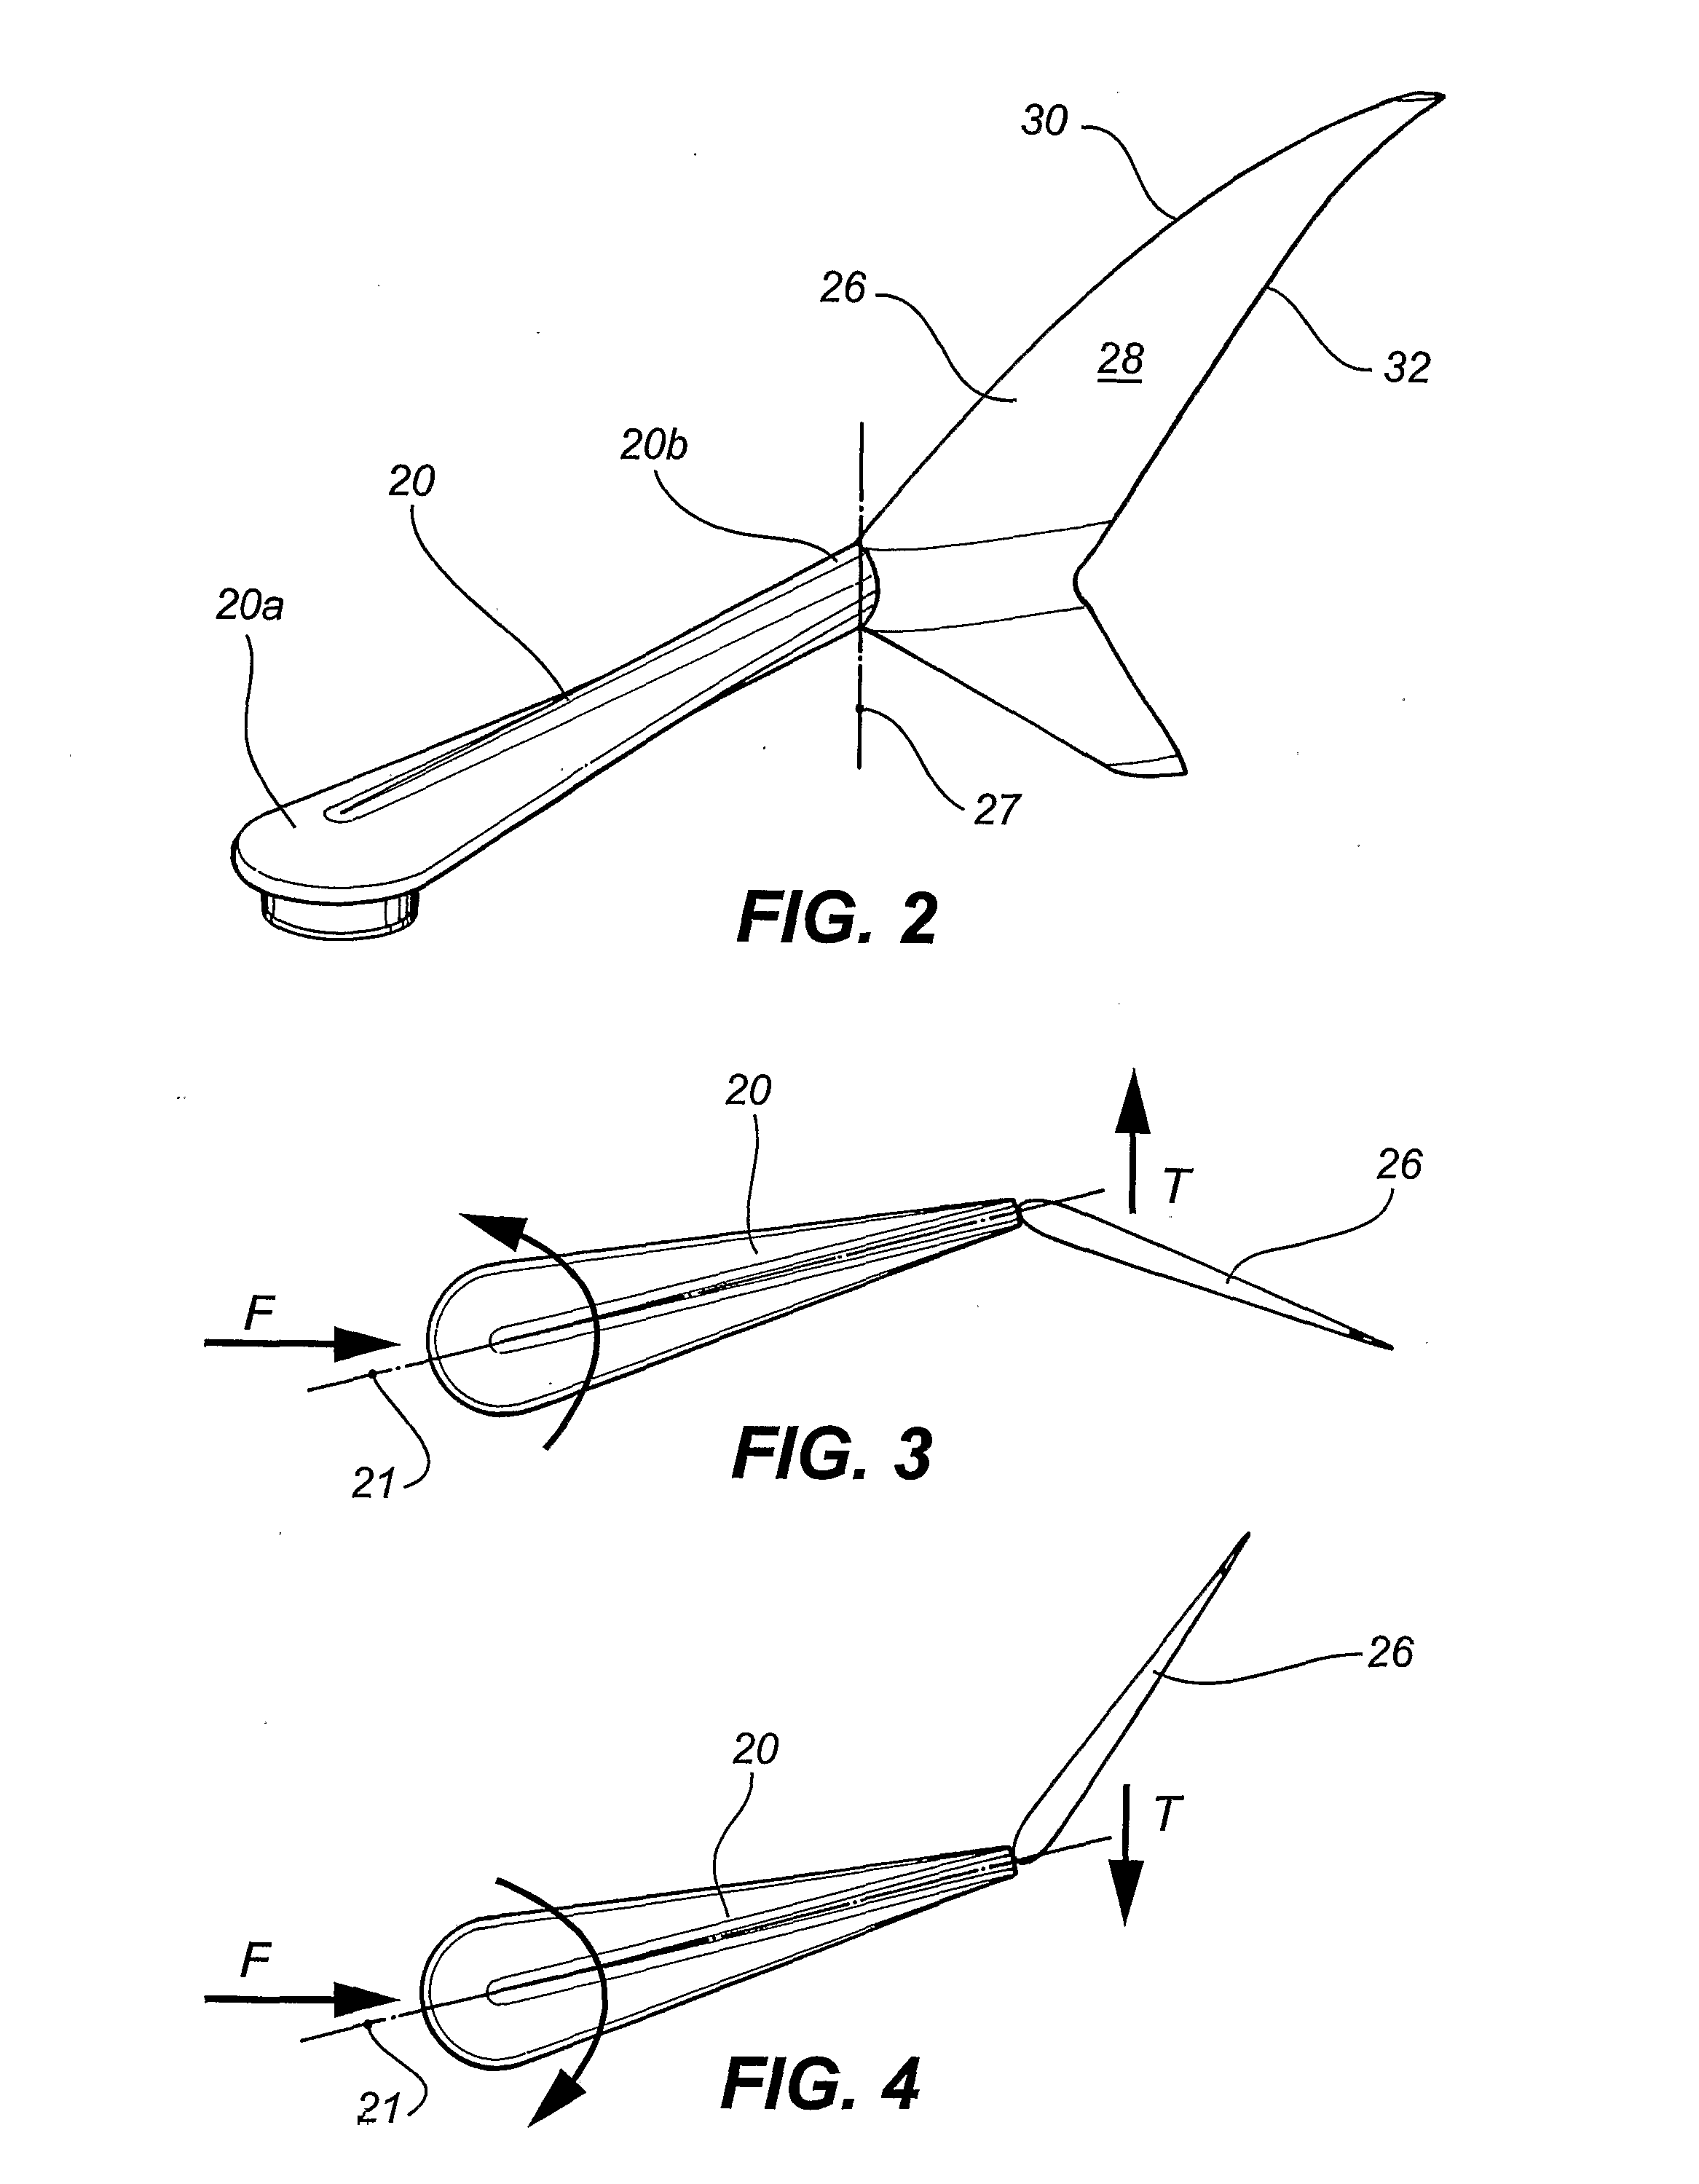 Device for Capturing Energy from a Fluid Flow